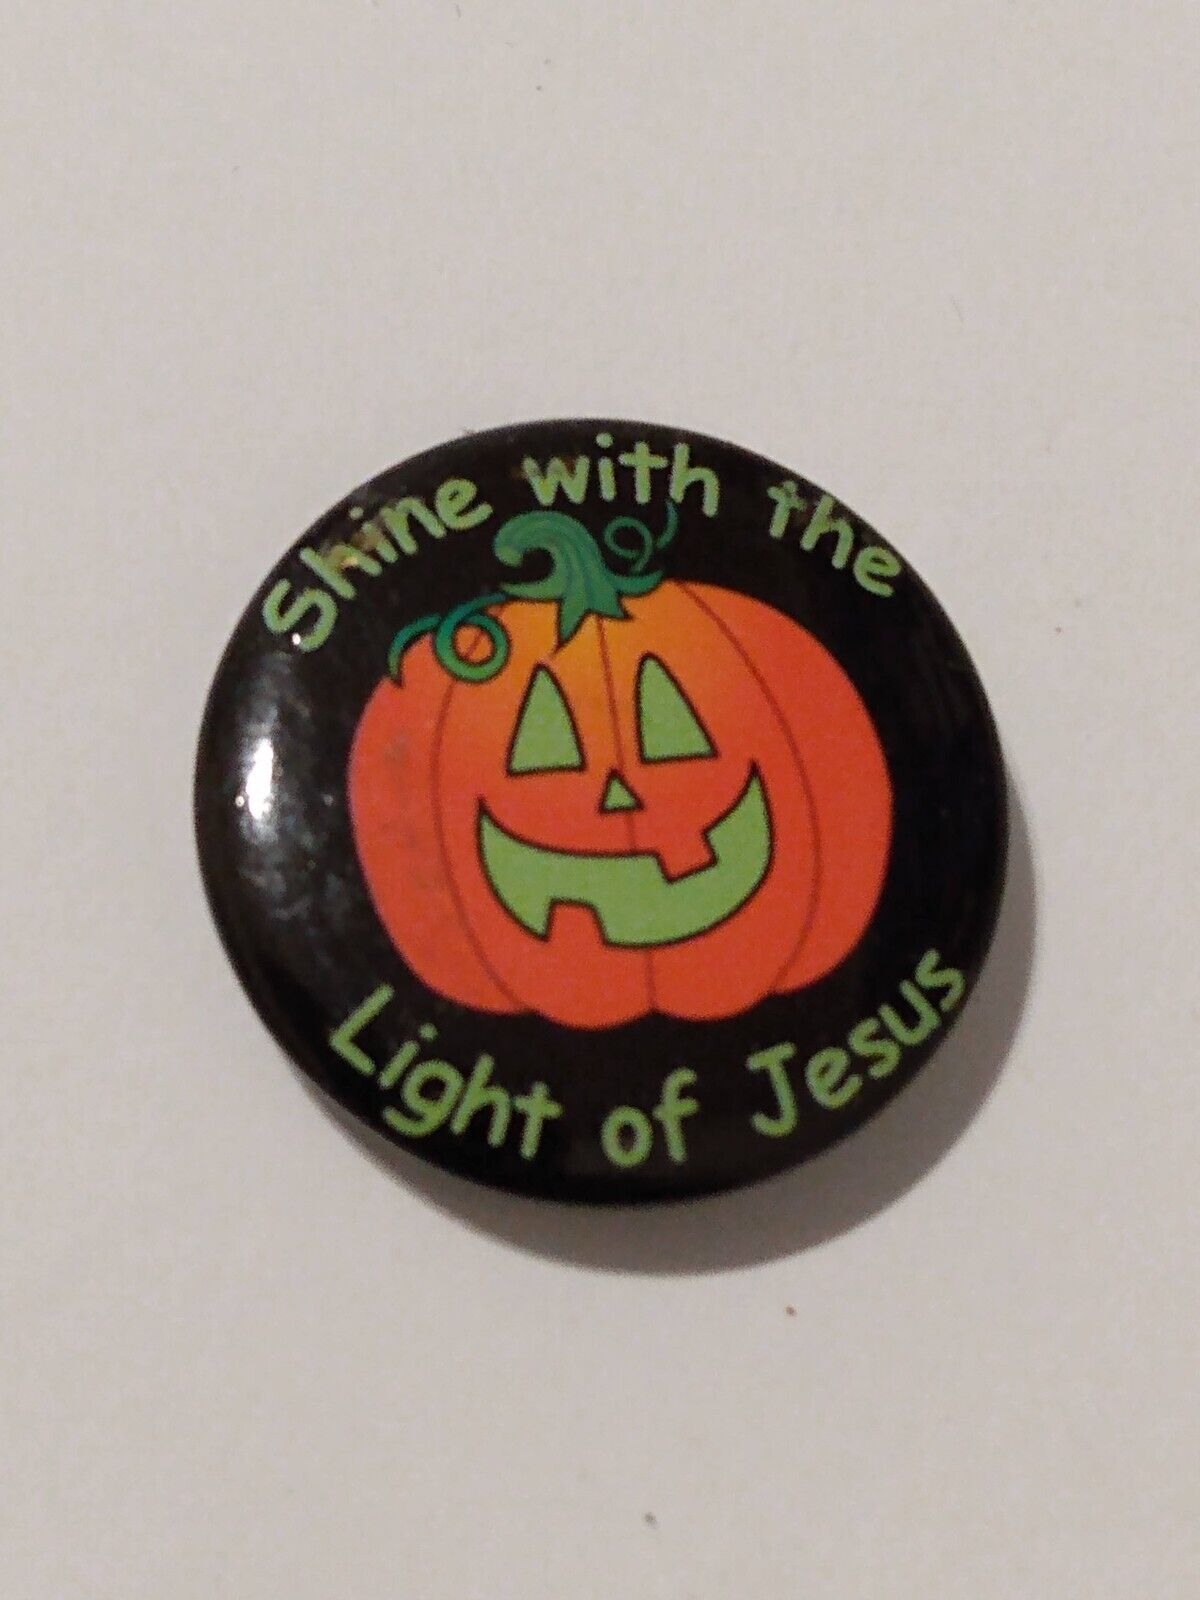 Shine with the Light of Jesus Pumpkin Badge Button Pin